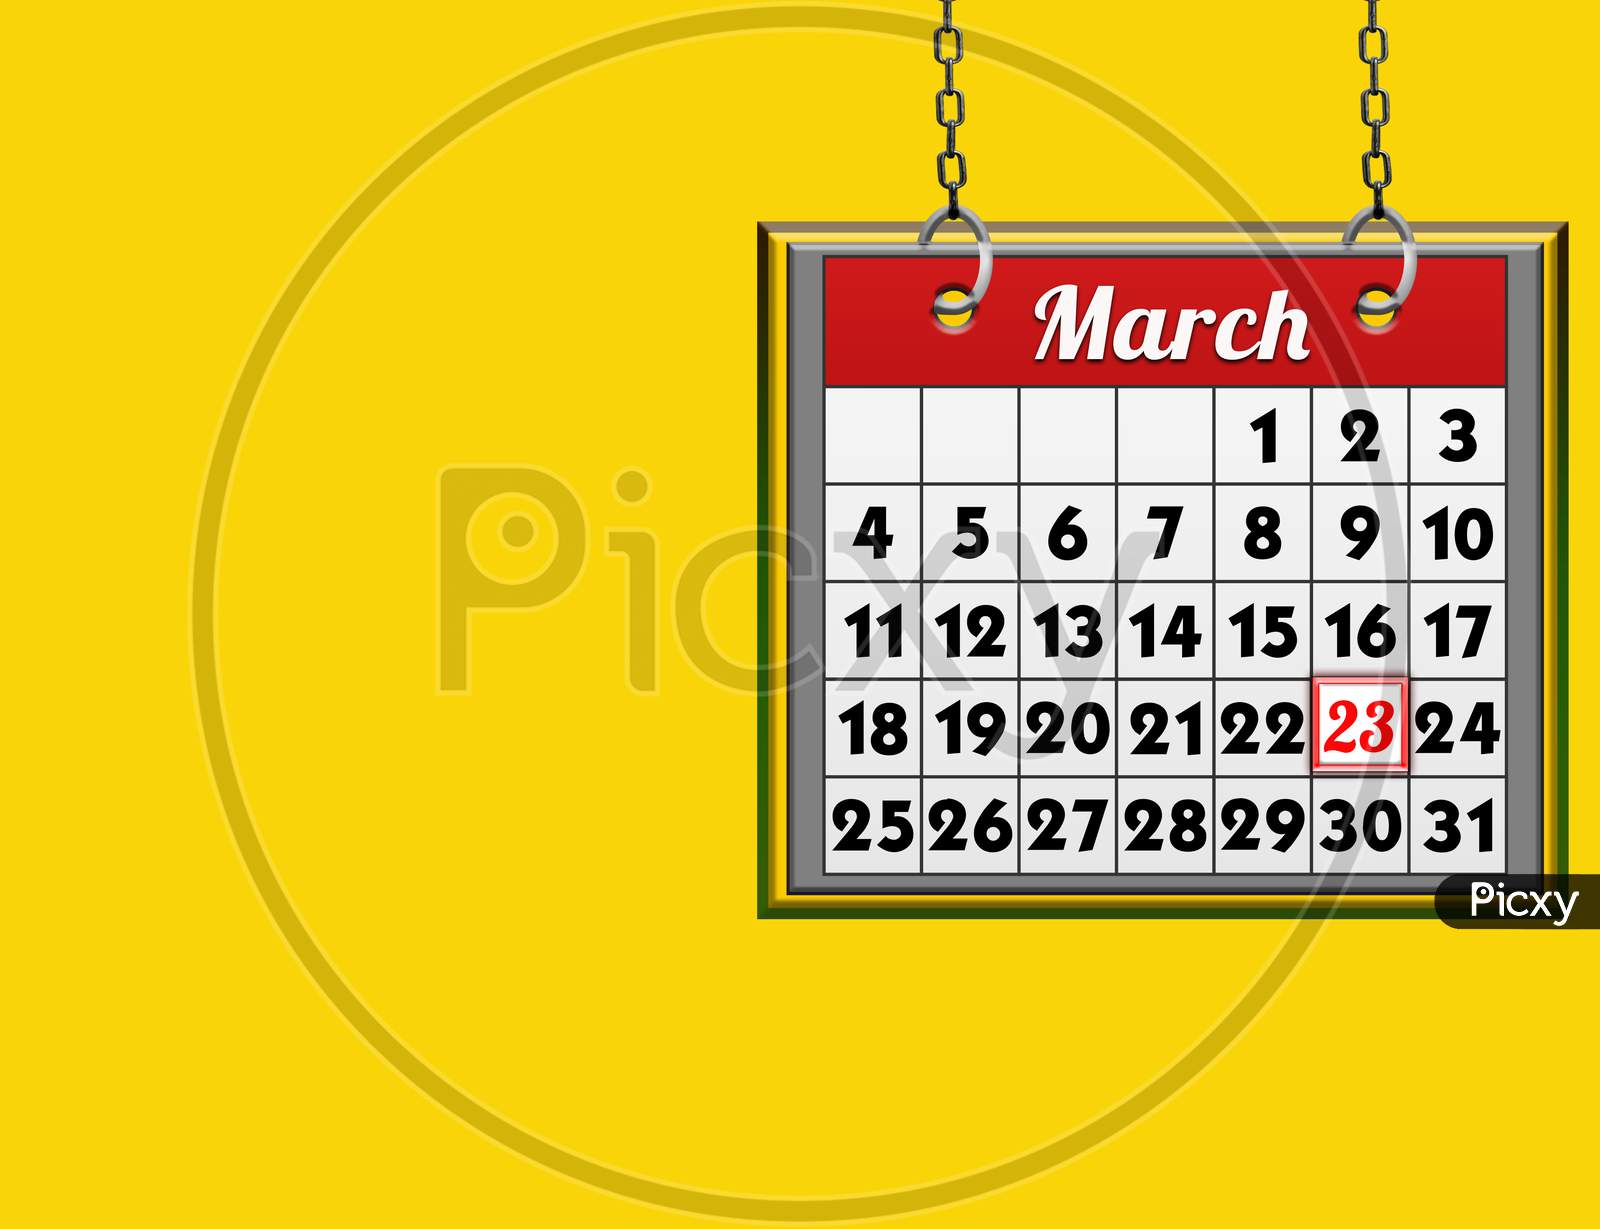 March 23 Calendar, On Yellow Background